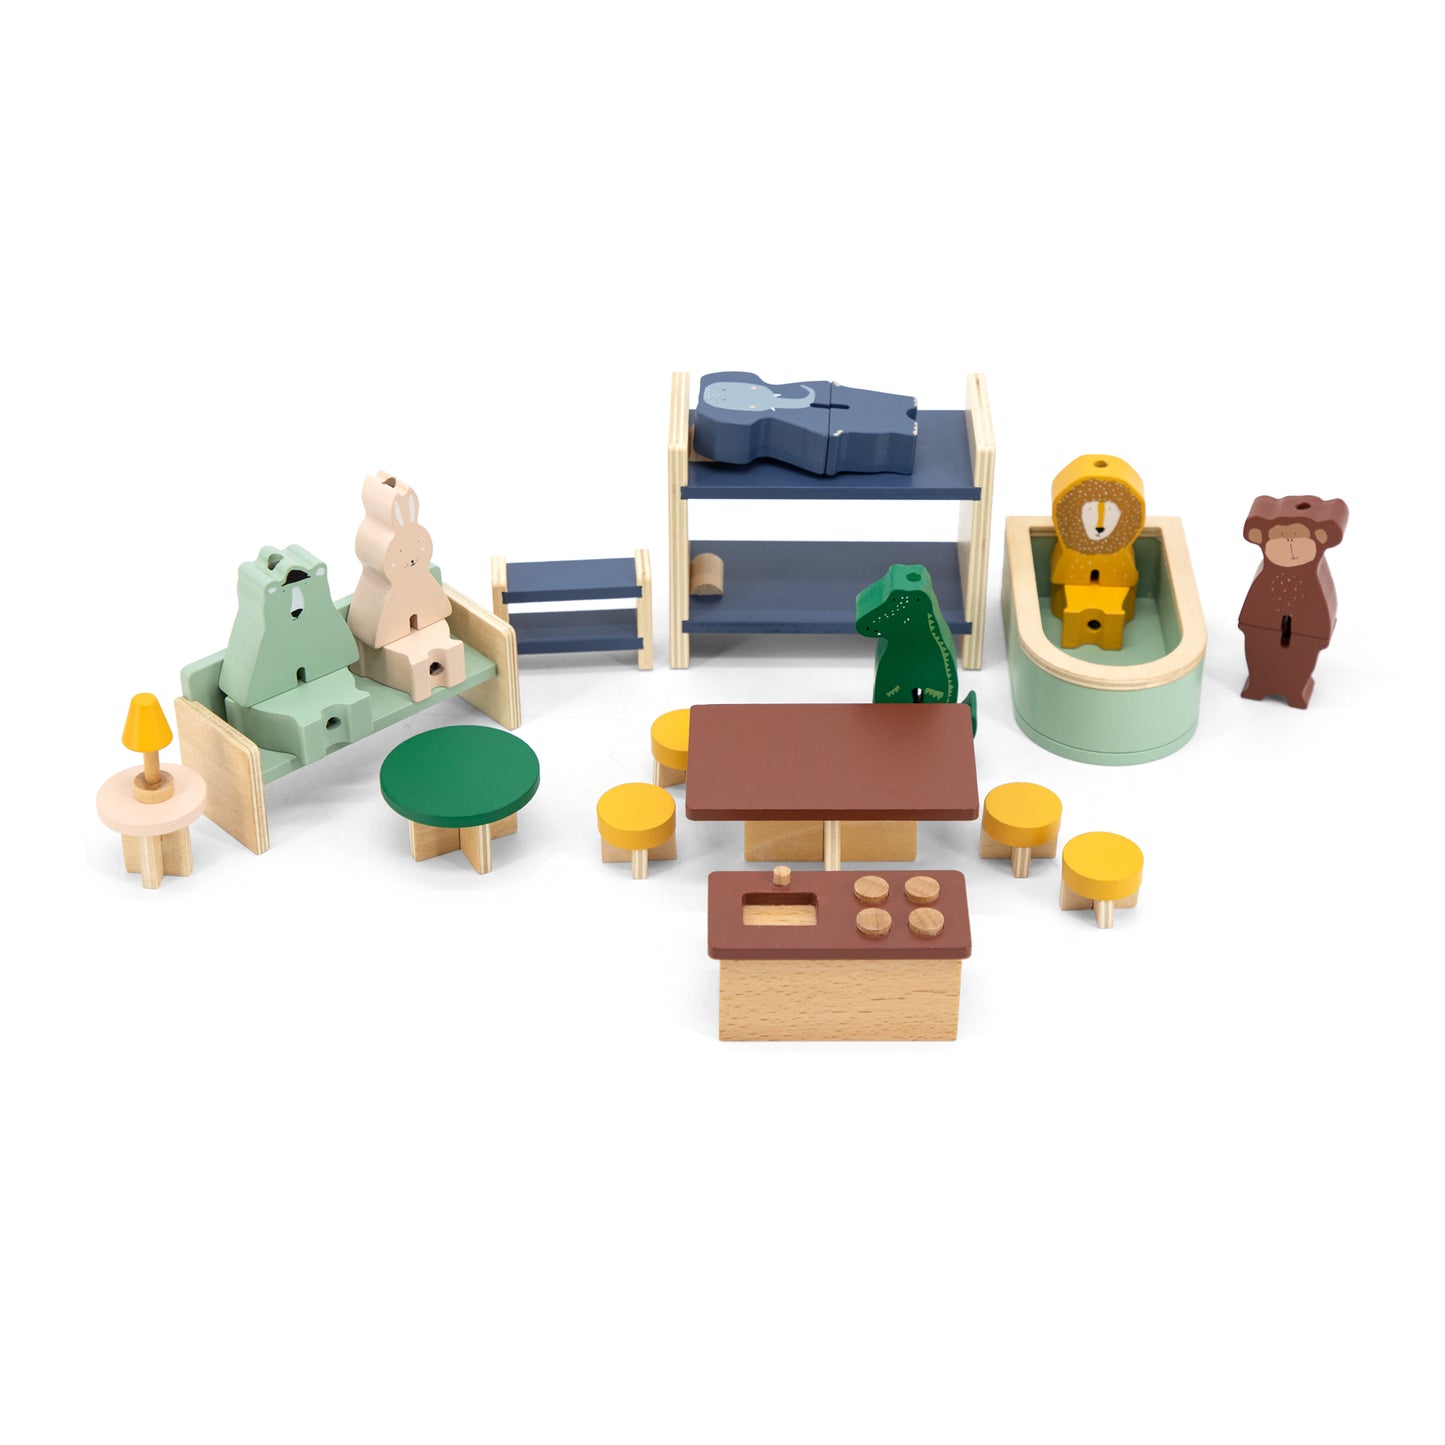 Trixie wooden play house with accessories